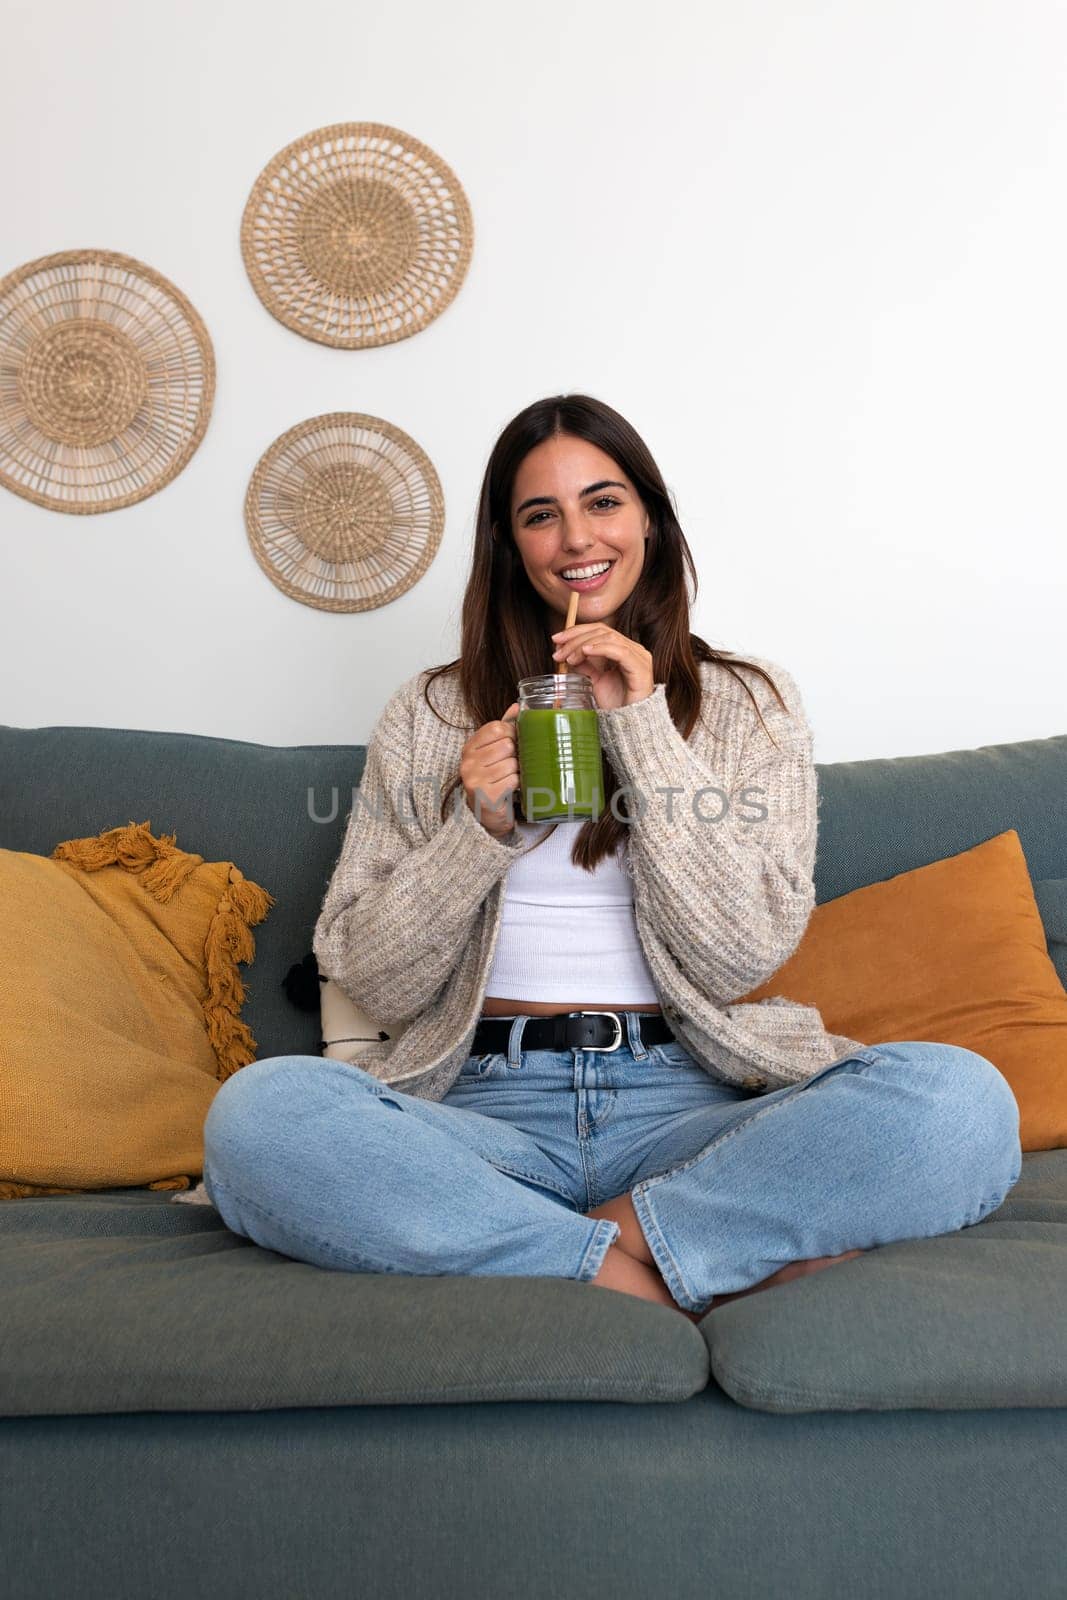 Vertical portrait of young beautiful woman relaxing at home sitting on the sofa drinking healthy green juice. Female enjoying smoothie looking at camera. Healthy lifestyle concept.